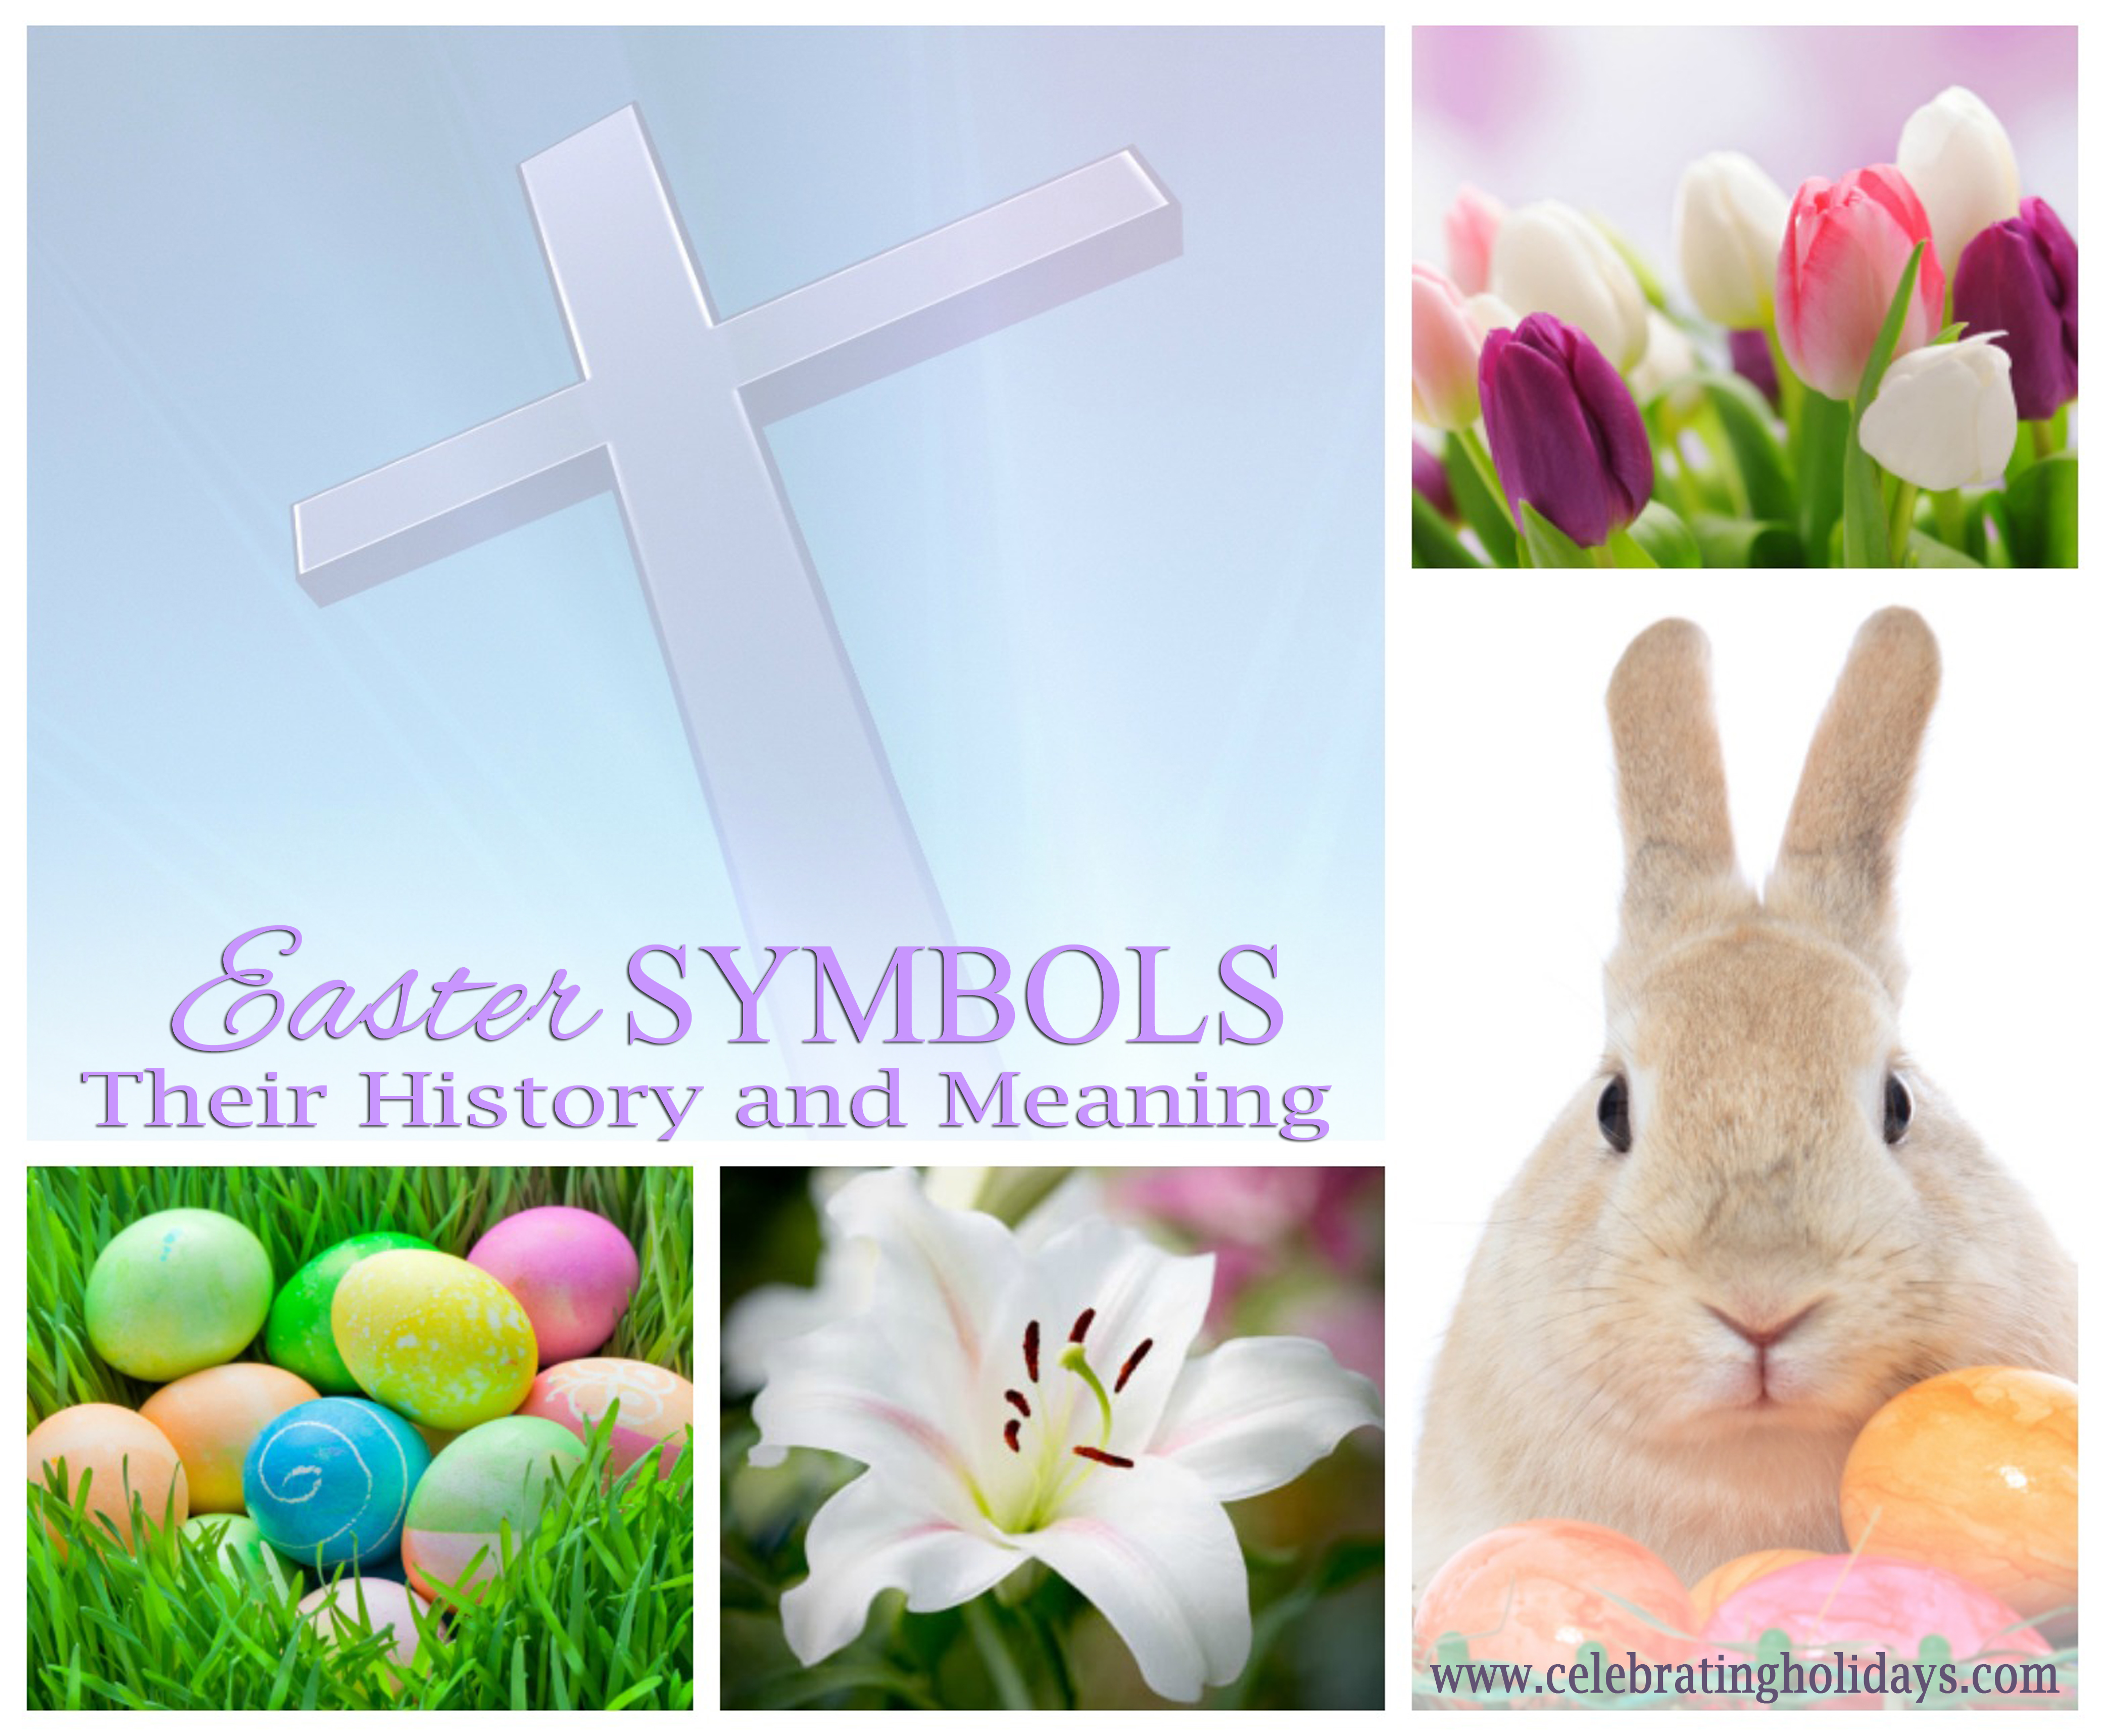 Easter Symbols: Their History and Meaning